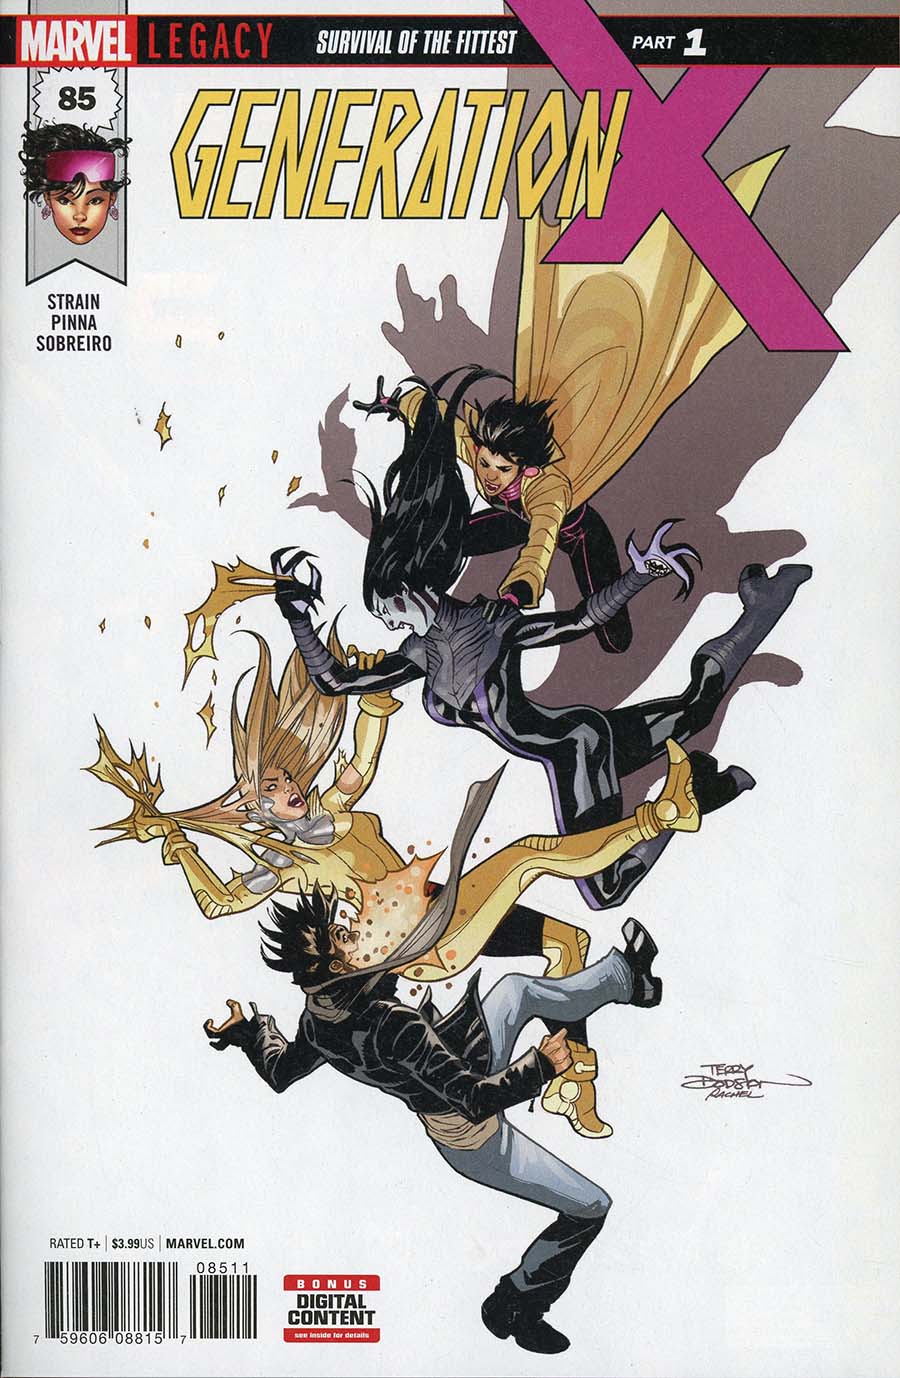 Generation X Vol 2 #85 Cover A Regular Terry Dodson Cover (Marvel Legacy Tie-In)